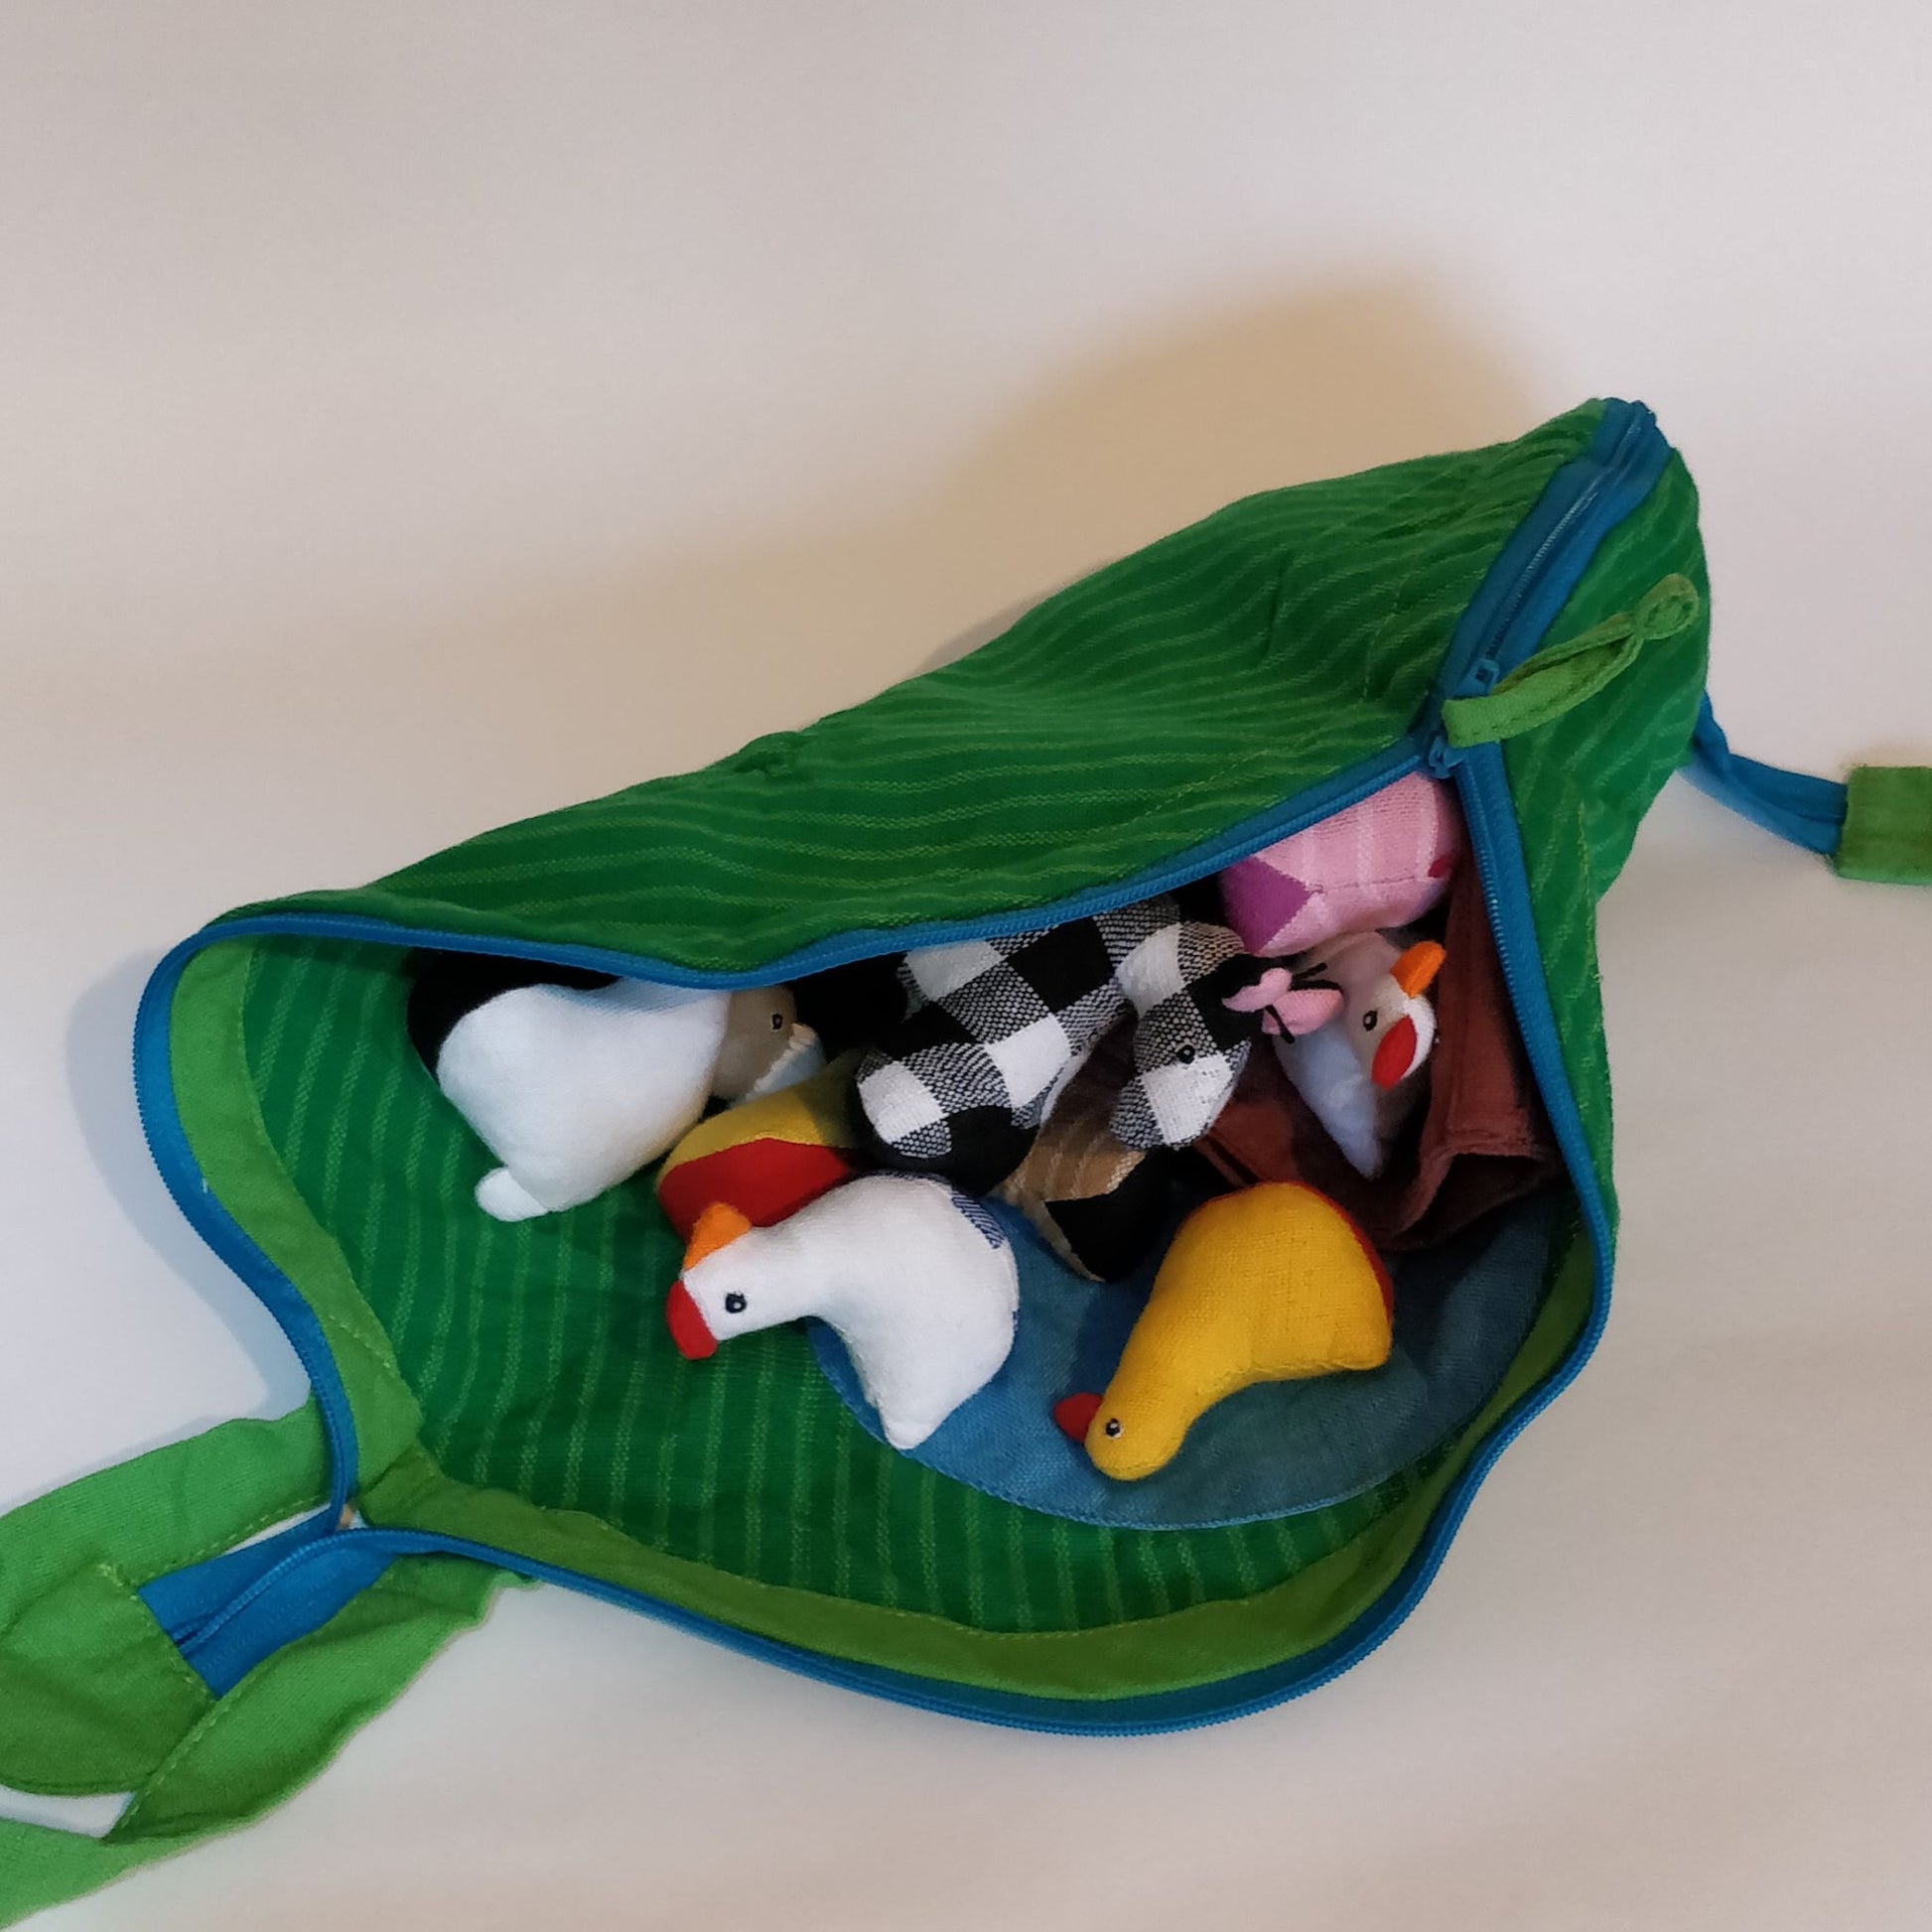 Farm Play Set Toy Pouch in Fair Trade Cotton - zip toy pouch